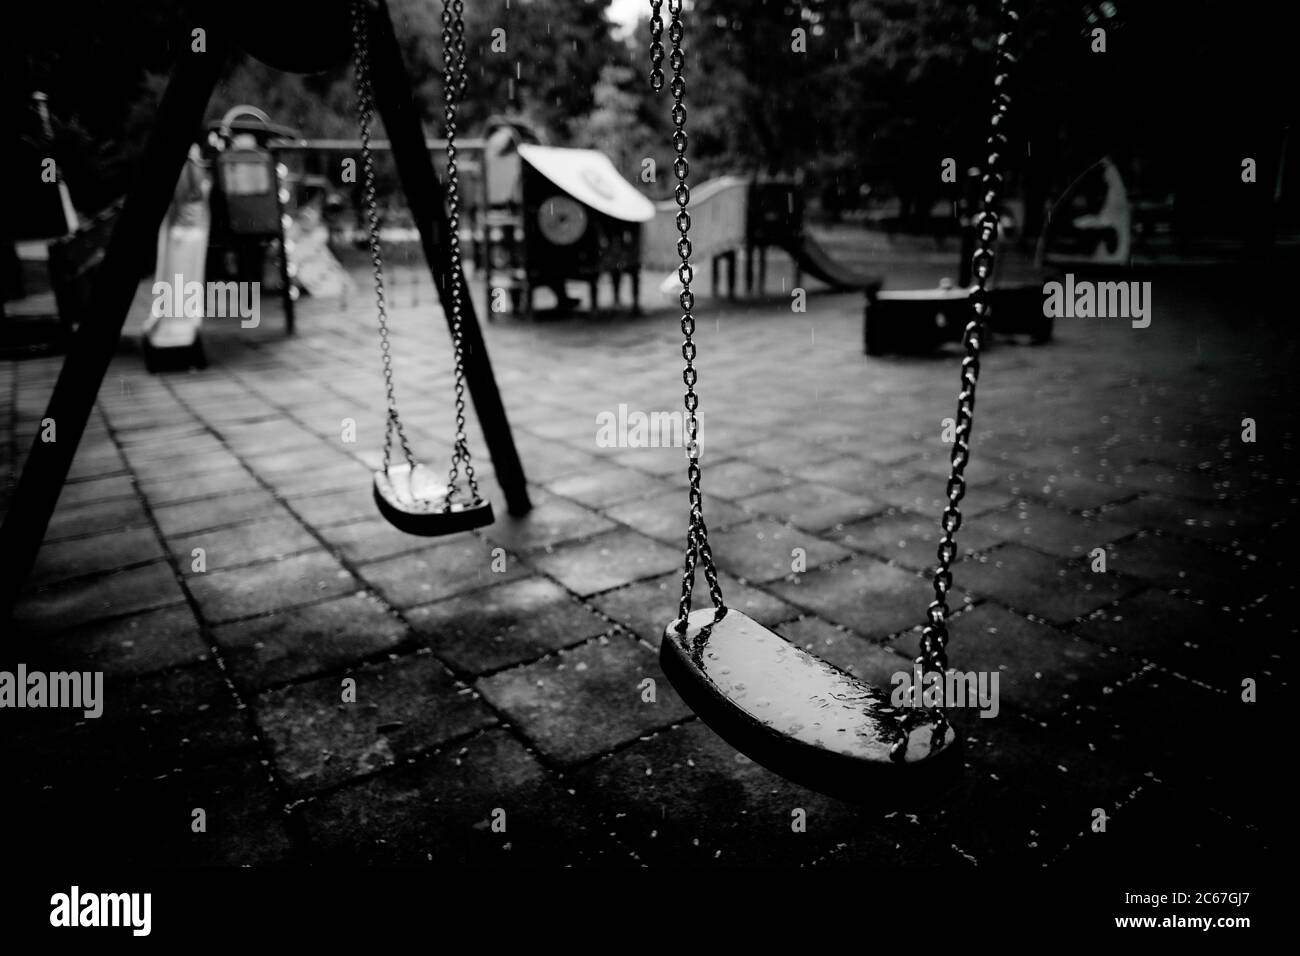 Plastic and wet swings in an empty playground during a rainy summer day. Stock Photo